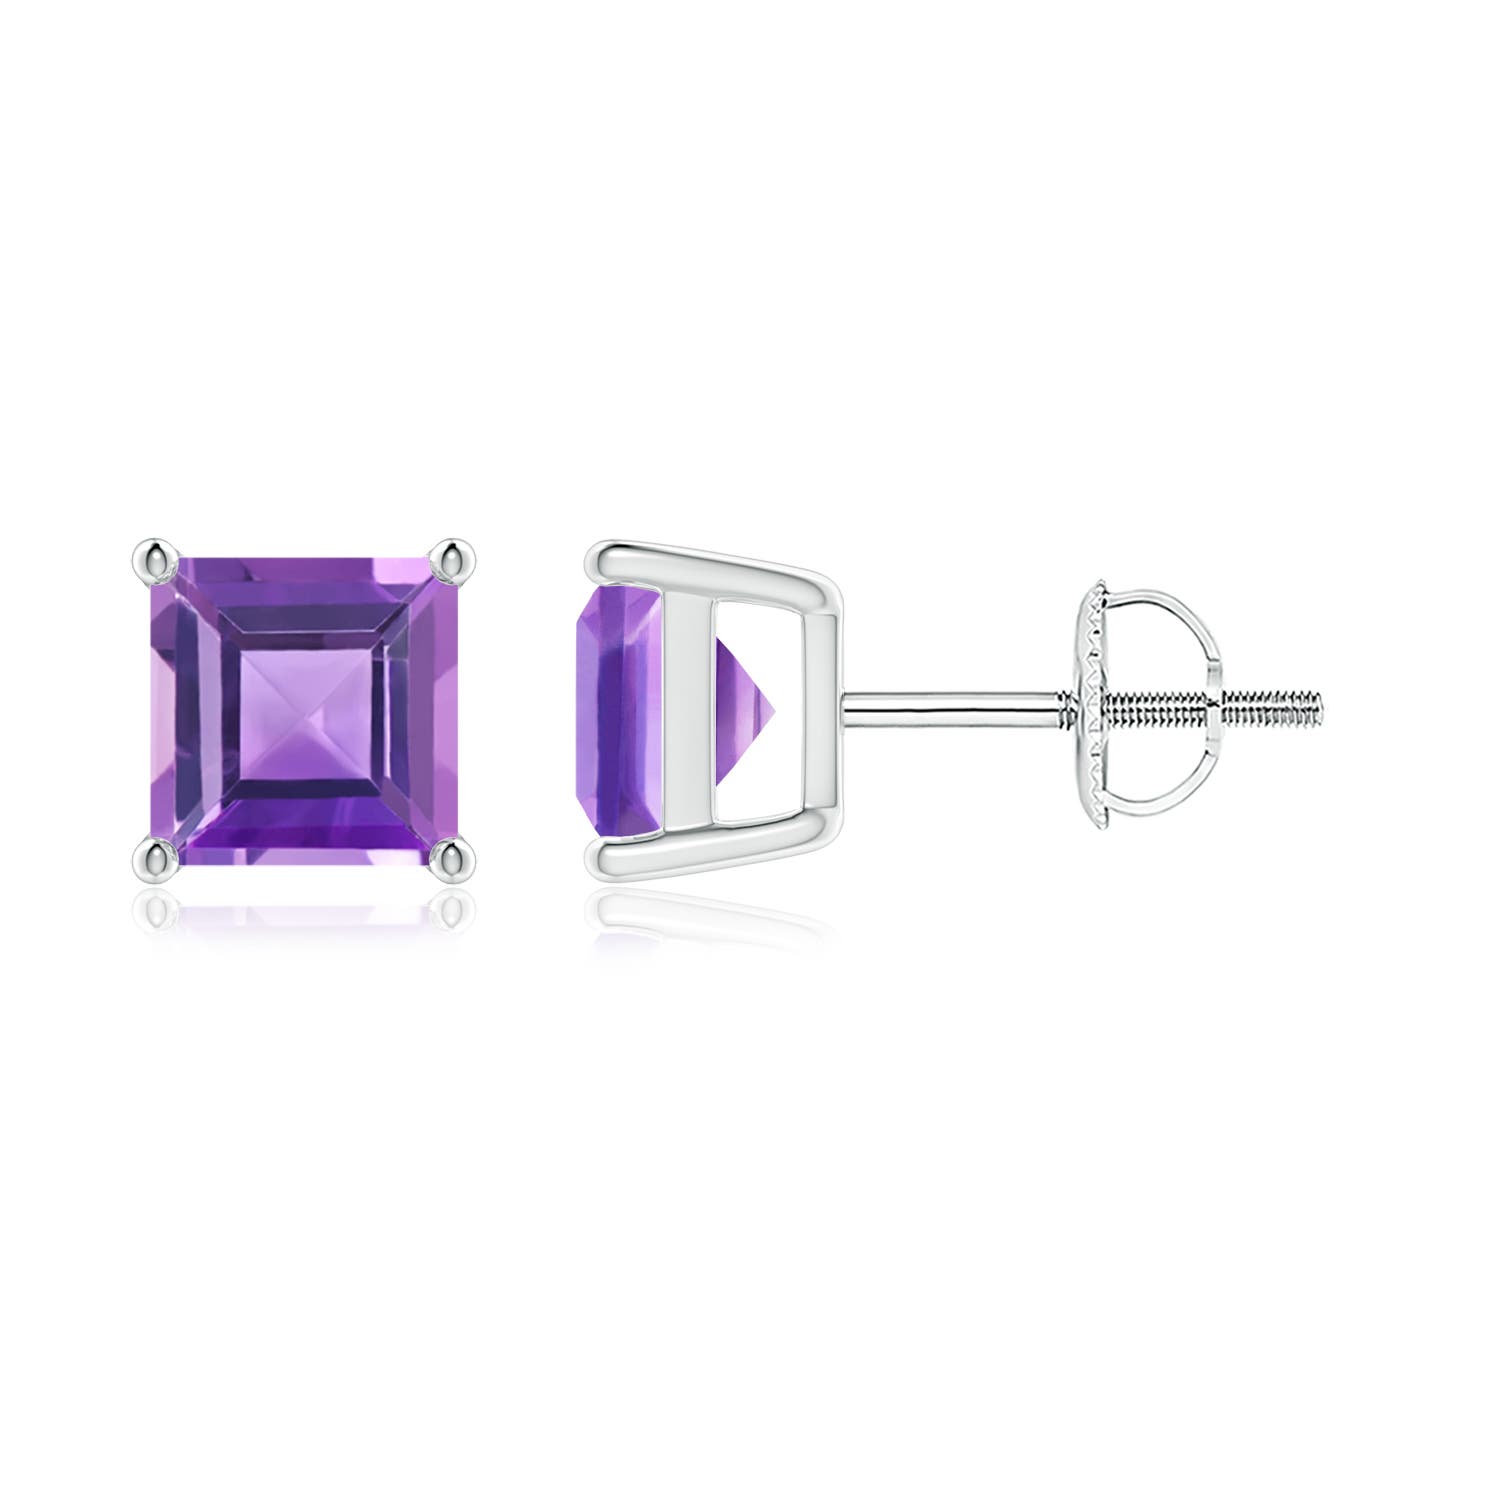 AA - Amethyst / 2 CT / 14 KT White Gold